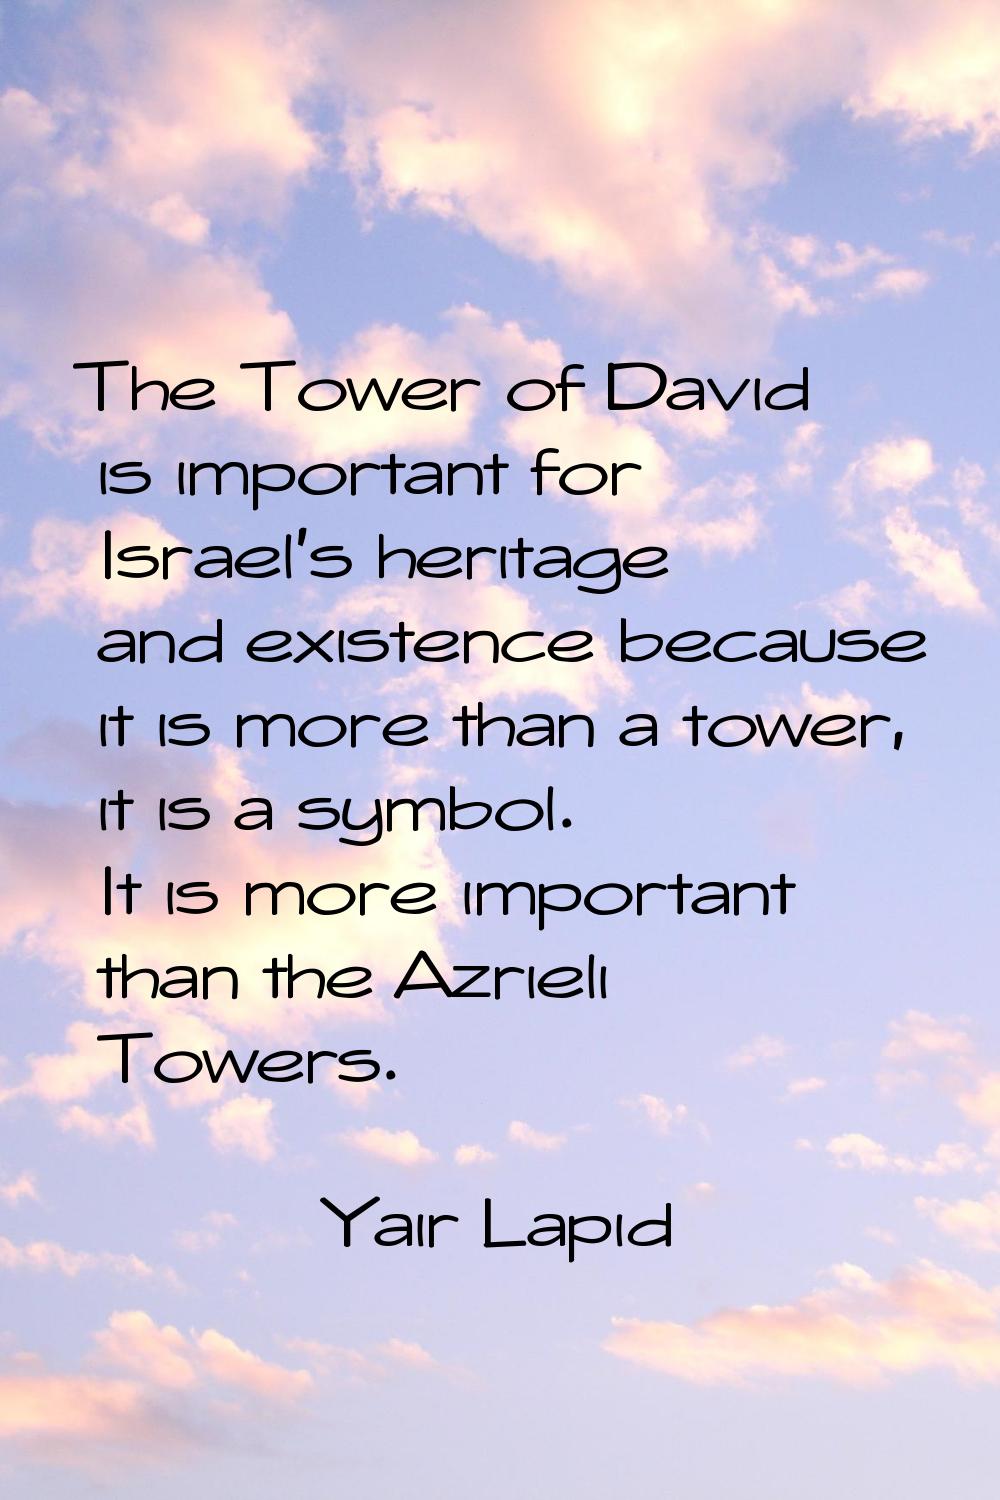 The Tower of David is important for Israel's heritage and existence because it is more than a tower